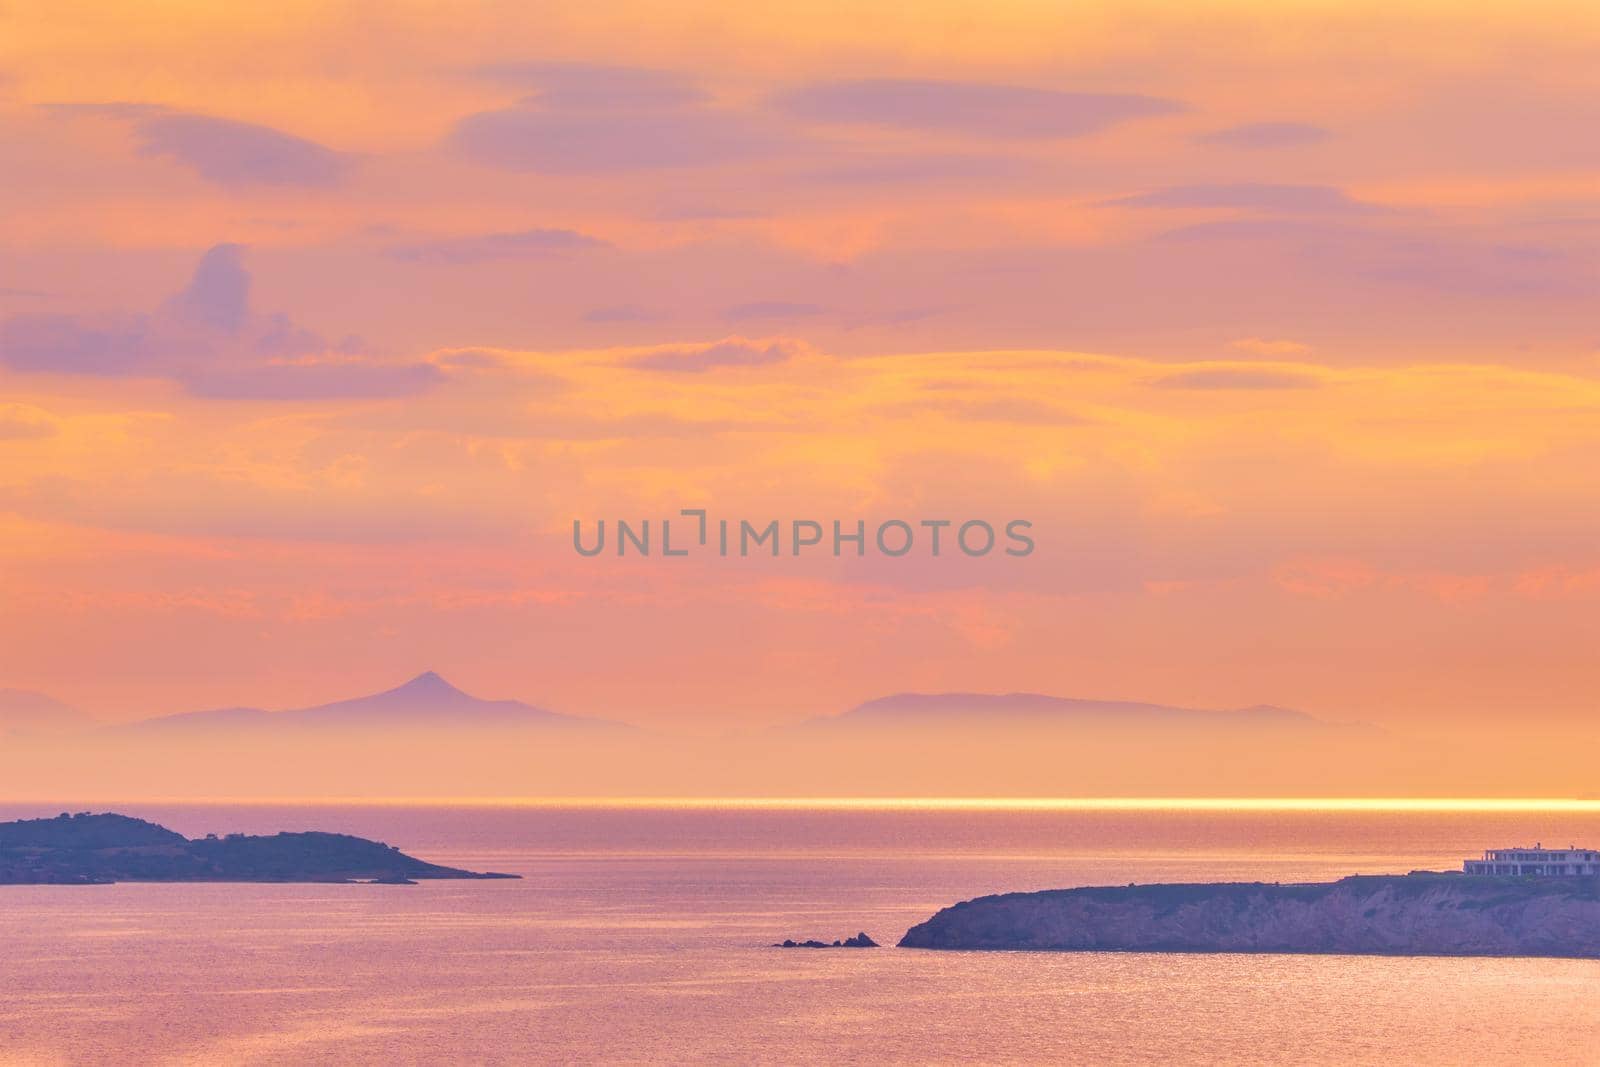 Aegean Sea with islands view on sunset by dimol